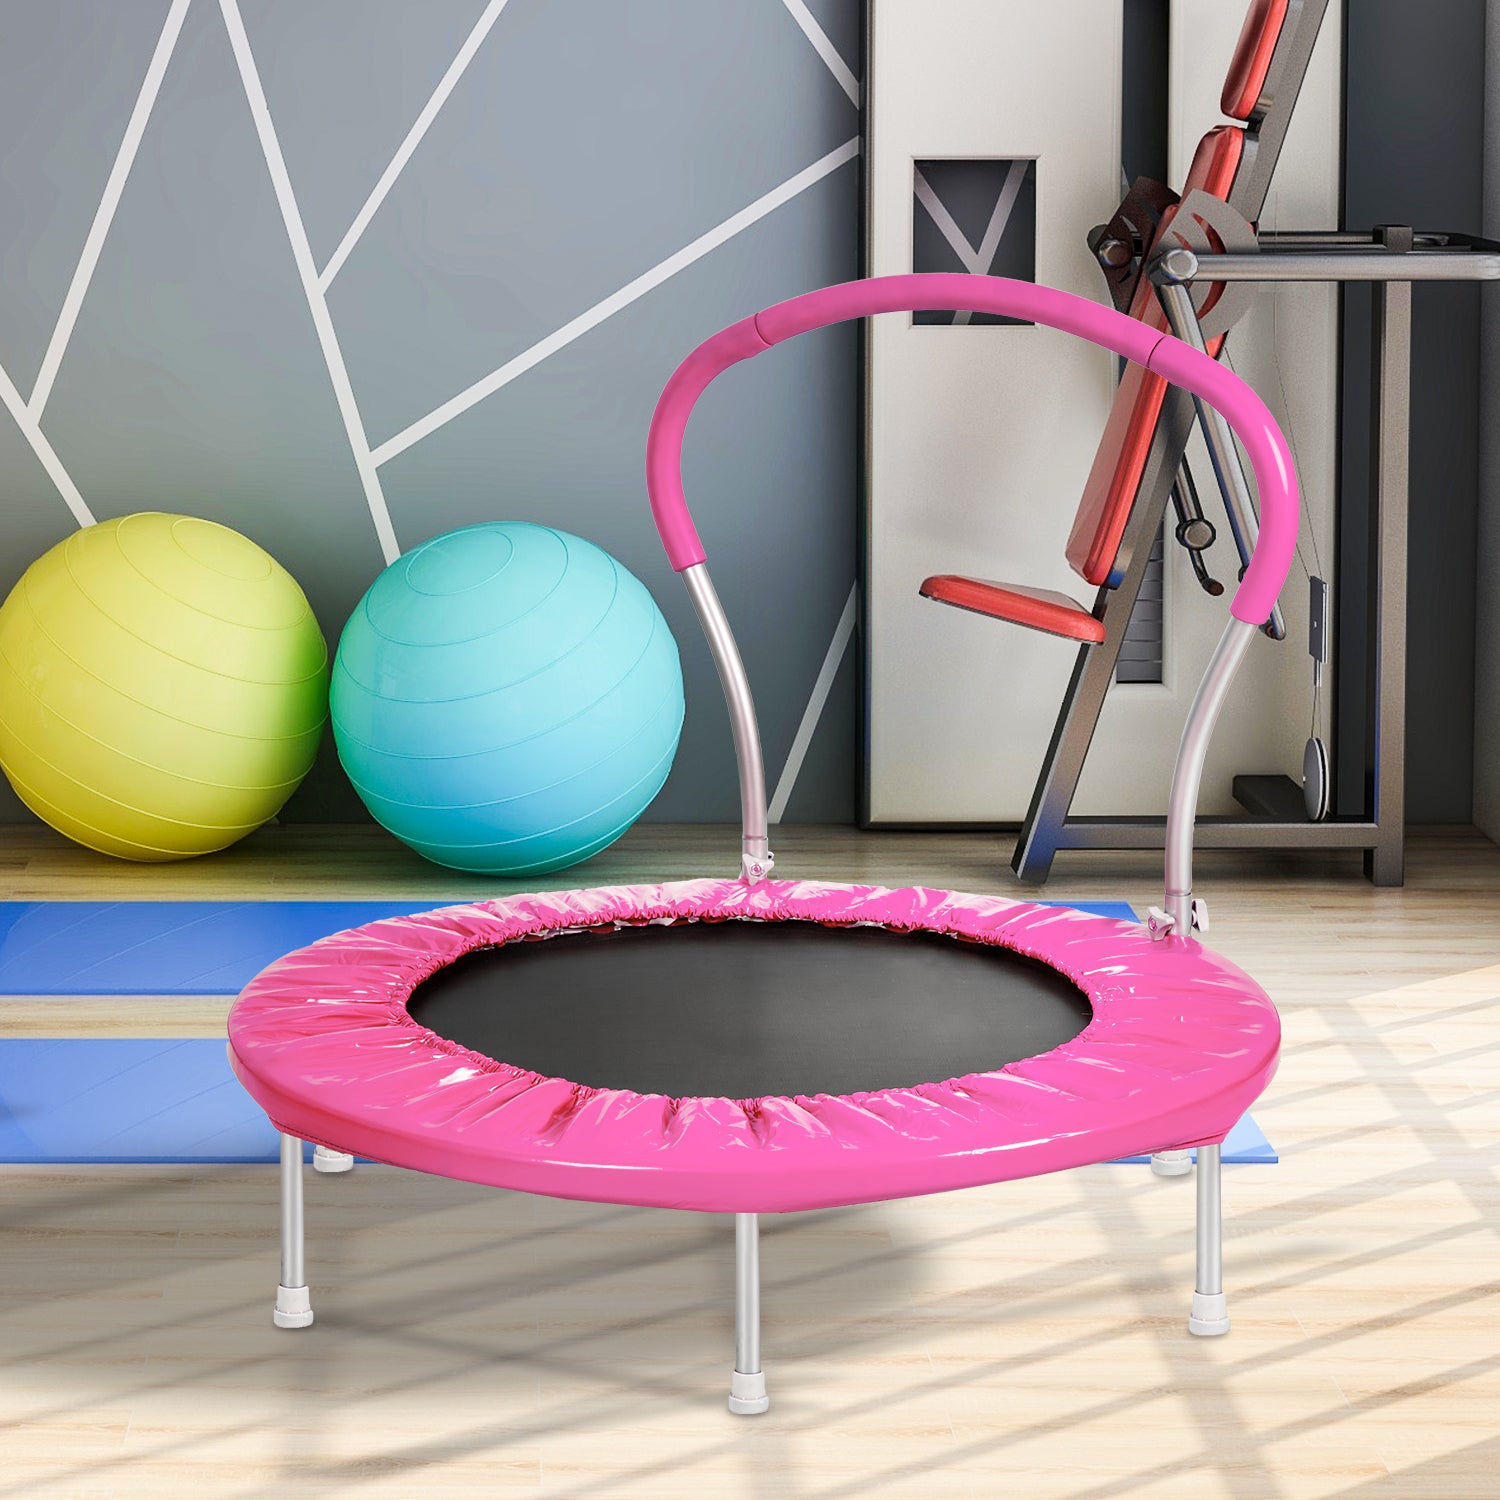 36" Trampoline With Handle Pi Metal